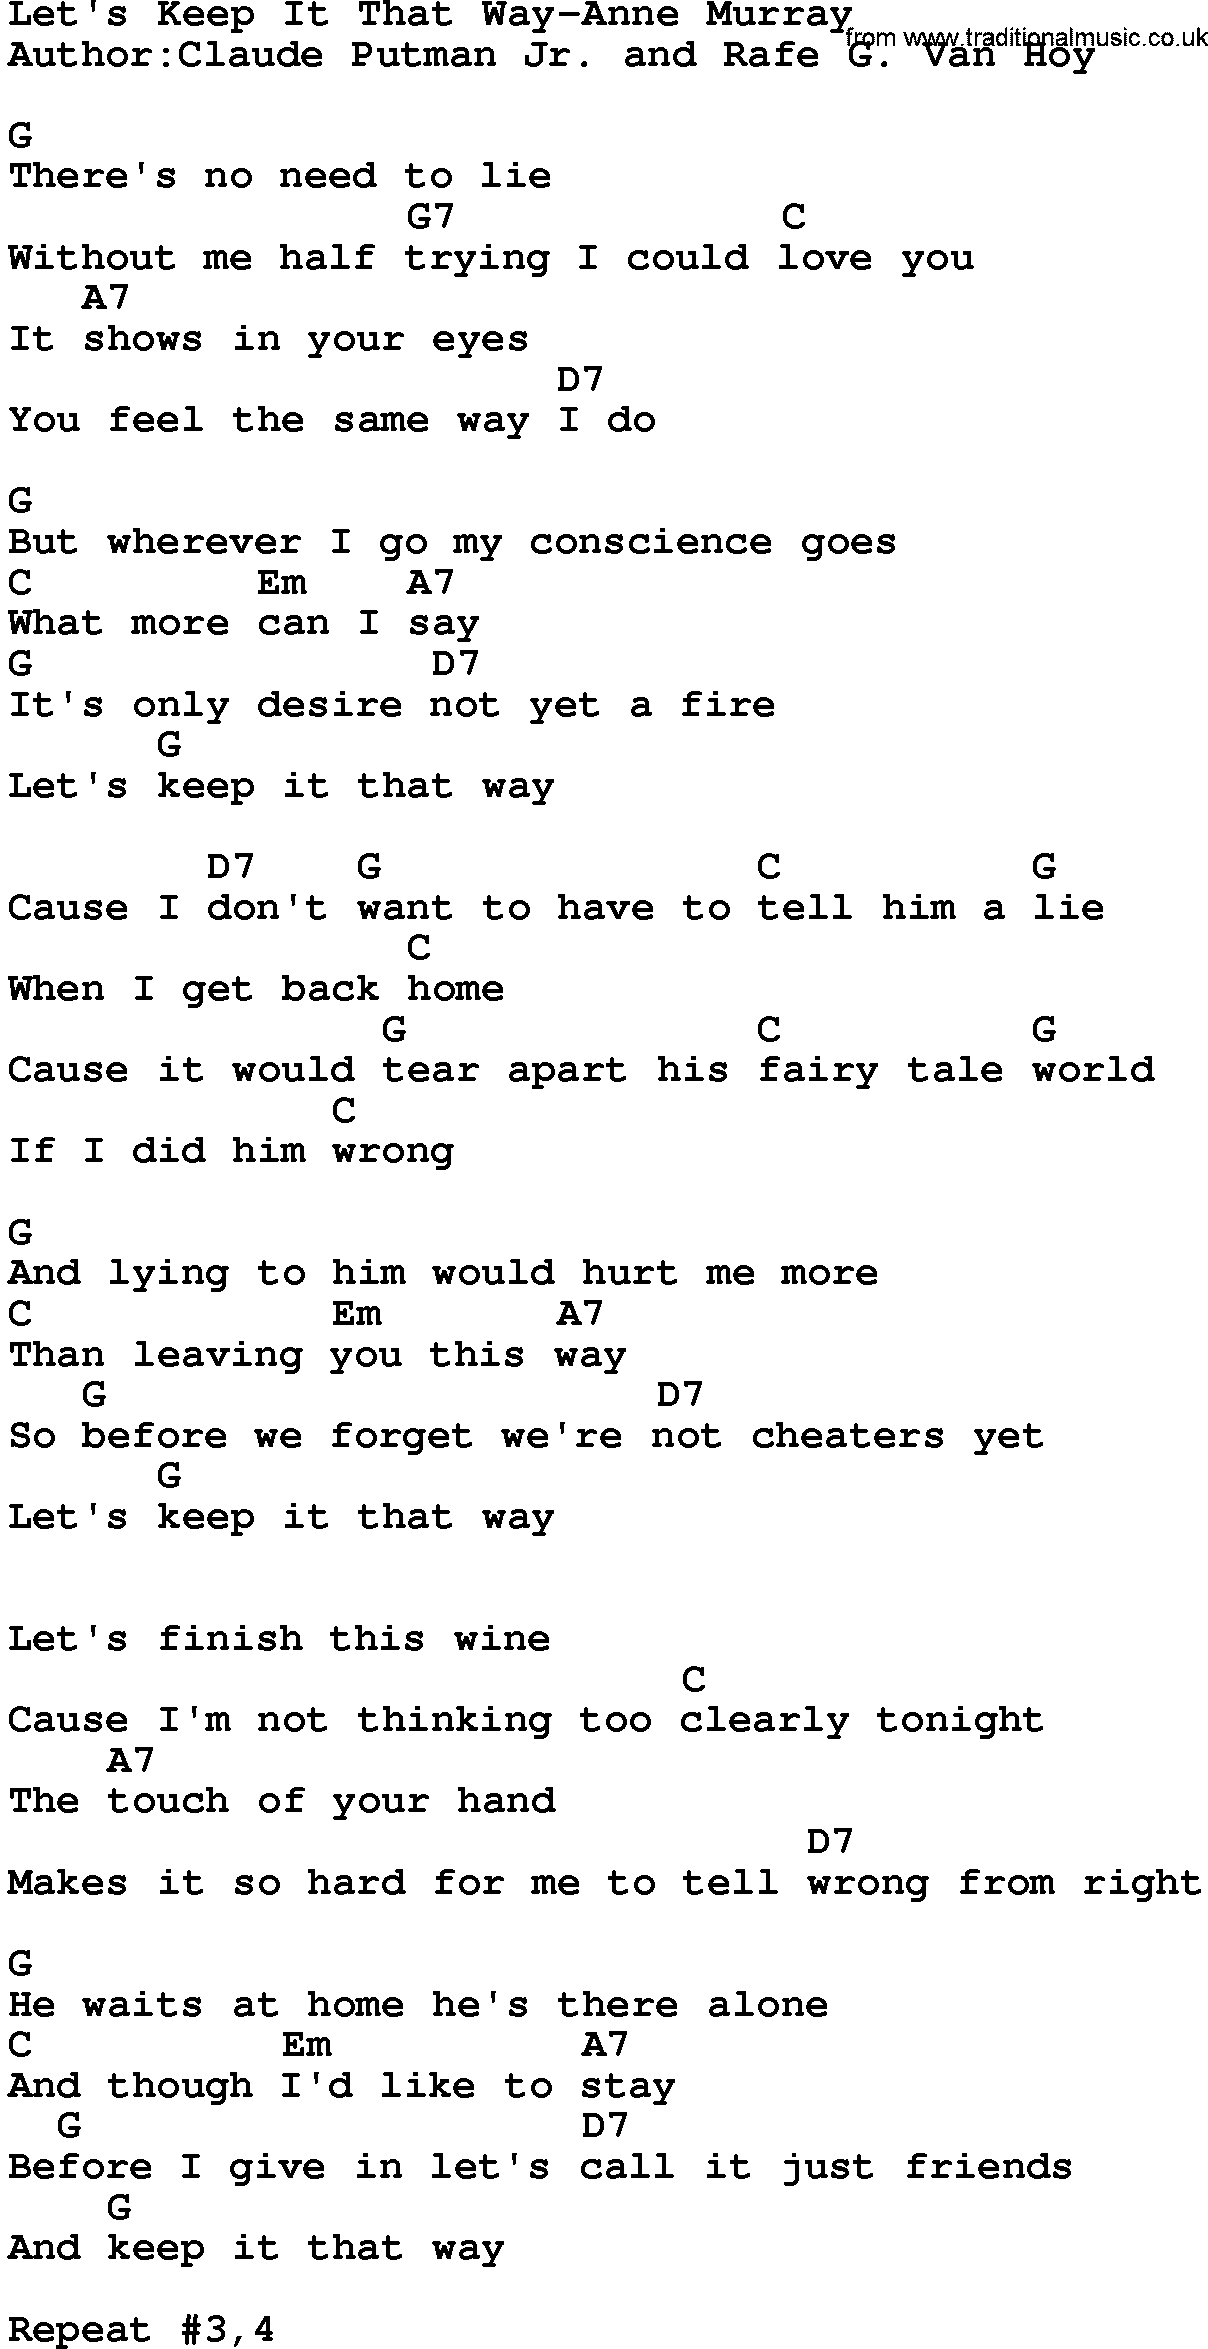 Chords Let s Get It On Country Music:Let's Keep It That Way-Anne Murray Lyrics and Chords